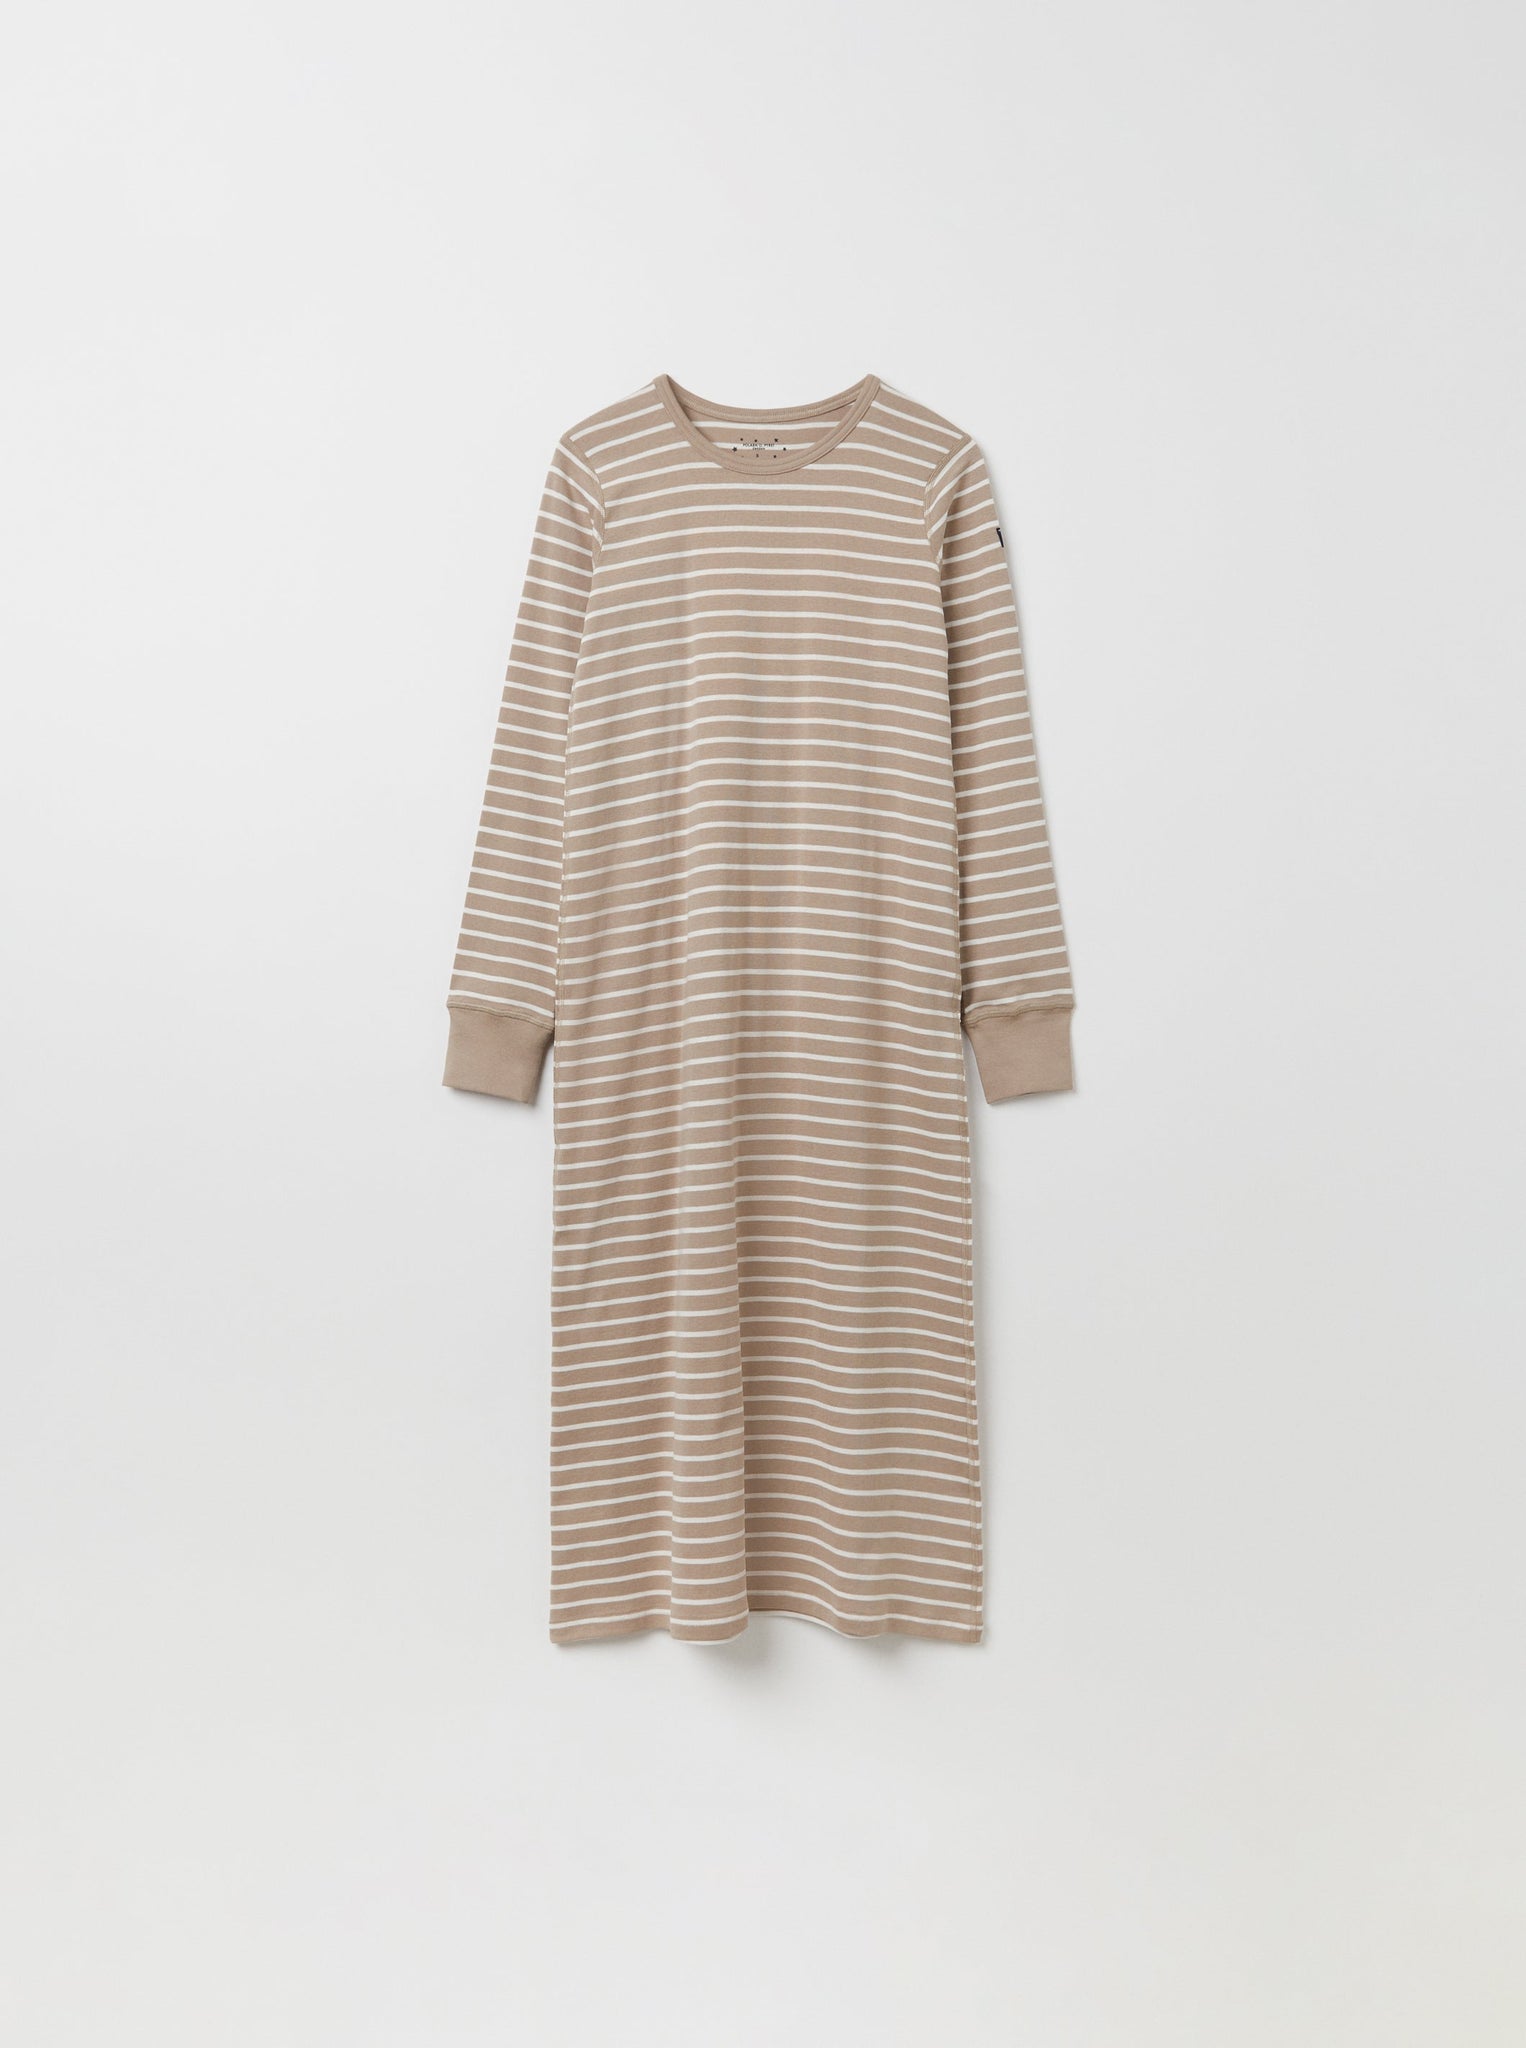 Organic Cotton Beige Adult Nightdress from the Polarn O. Pyret adult collection. Ethically produced kids clothing.